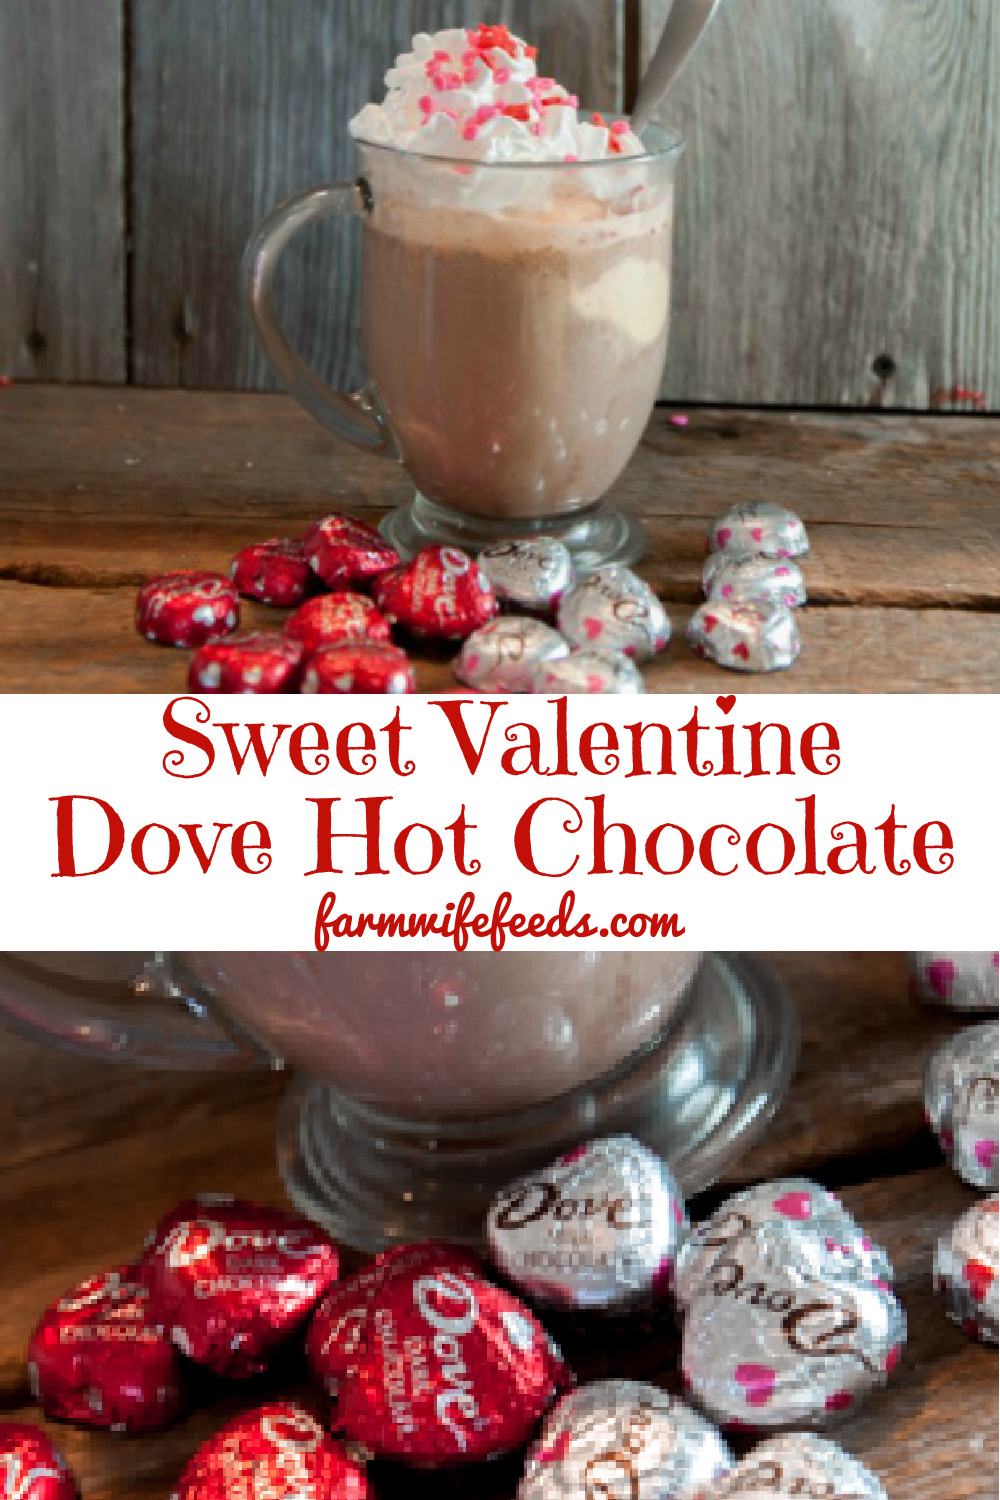 Sweet Valentine Dove Hot Chocolate from Farmwife Feeds. A creamy Dove chocolate melts perfectly in warm milk for a delicious warm winter drink. #hotchocolate #dove #valentine